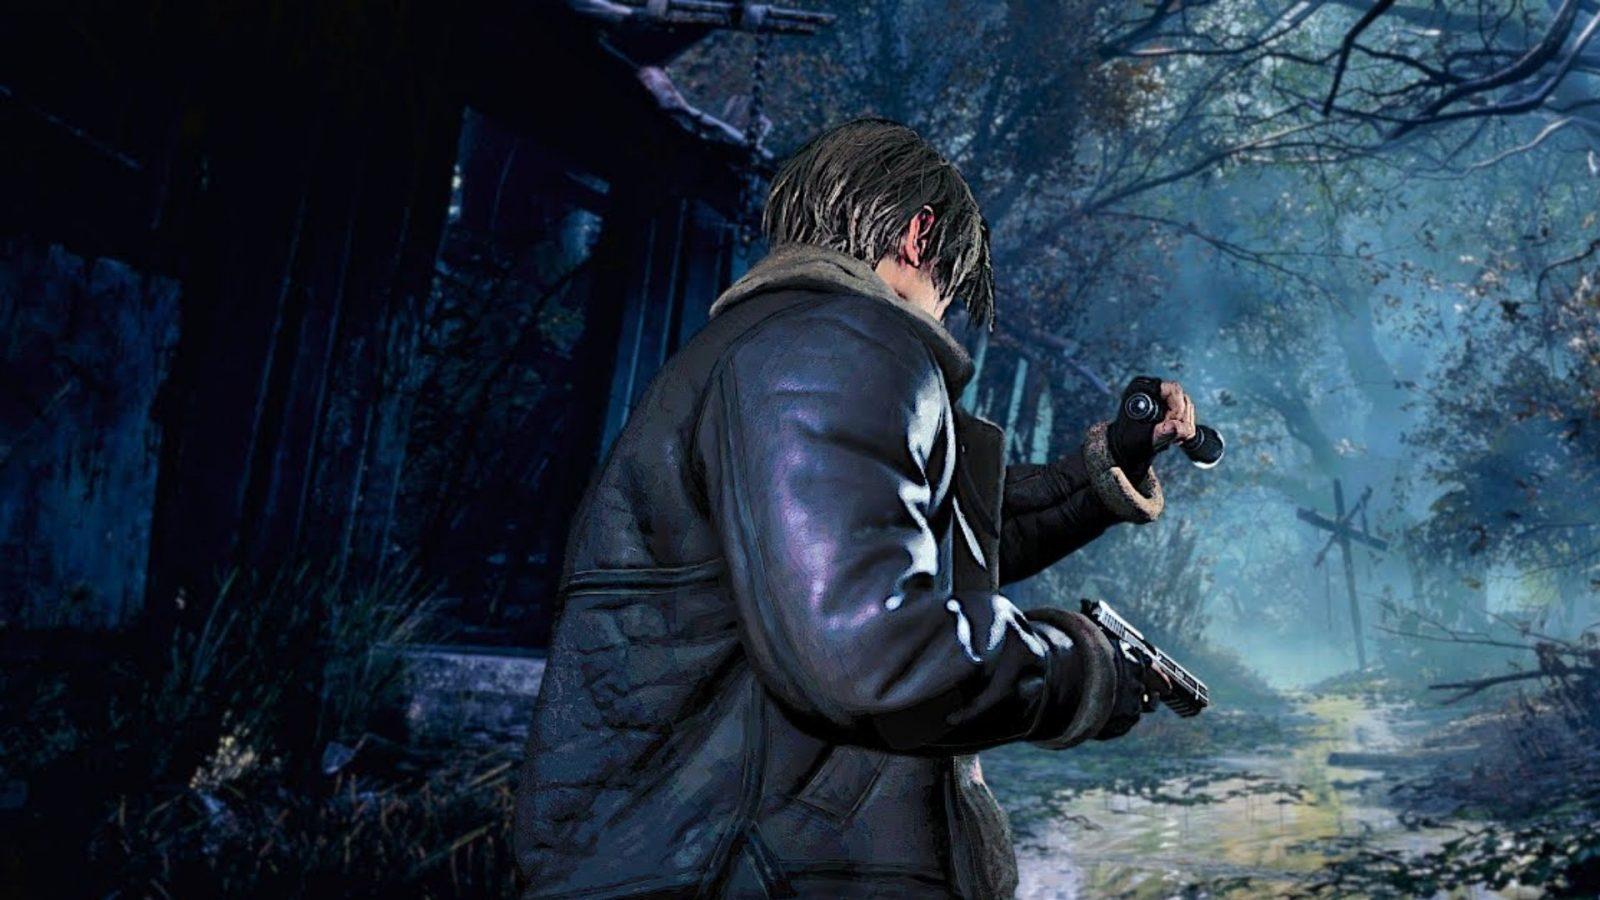 Small Details We Noticed In The Resident Evil 4 Remake Gameplay Trailer